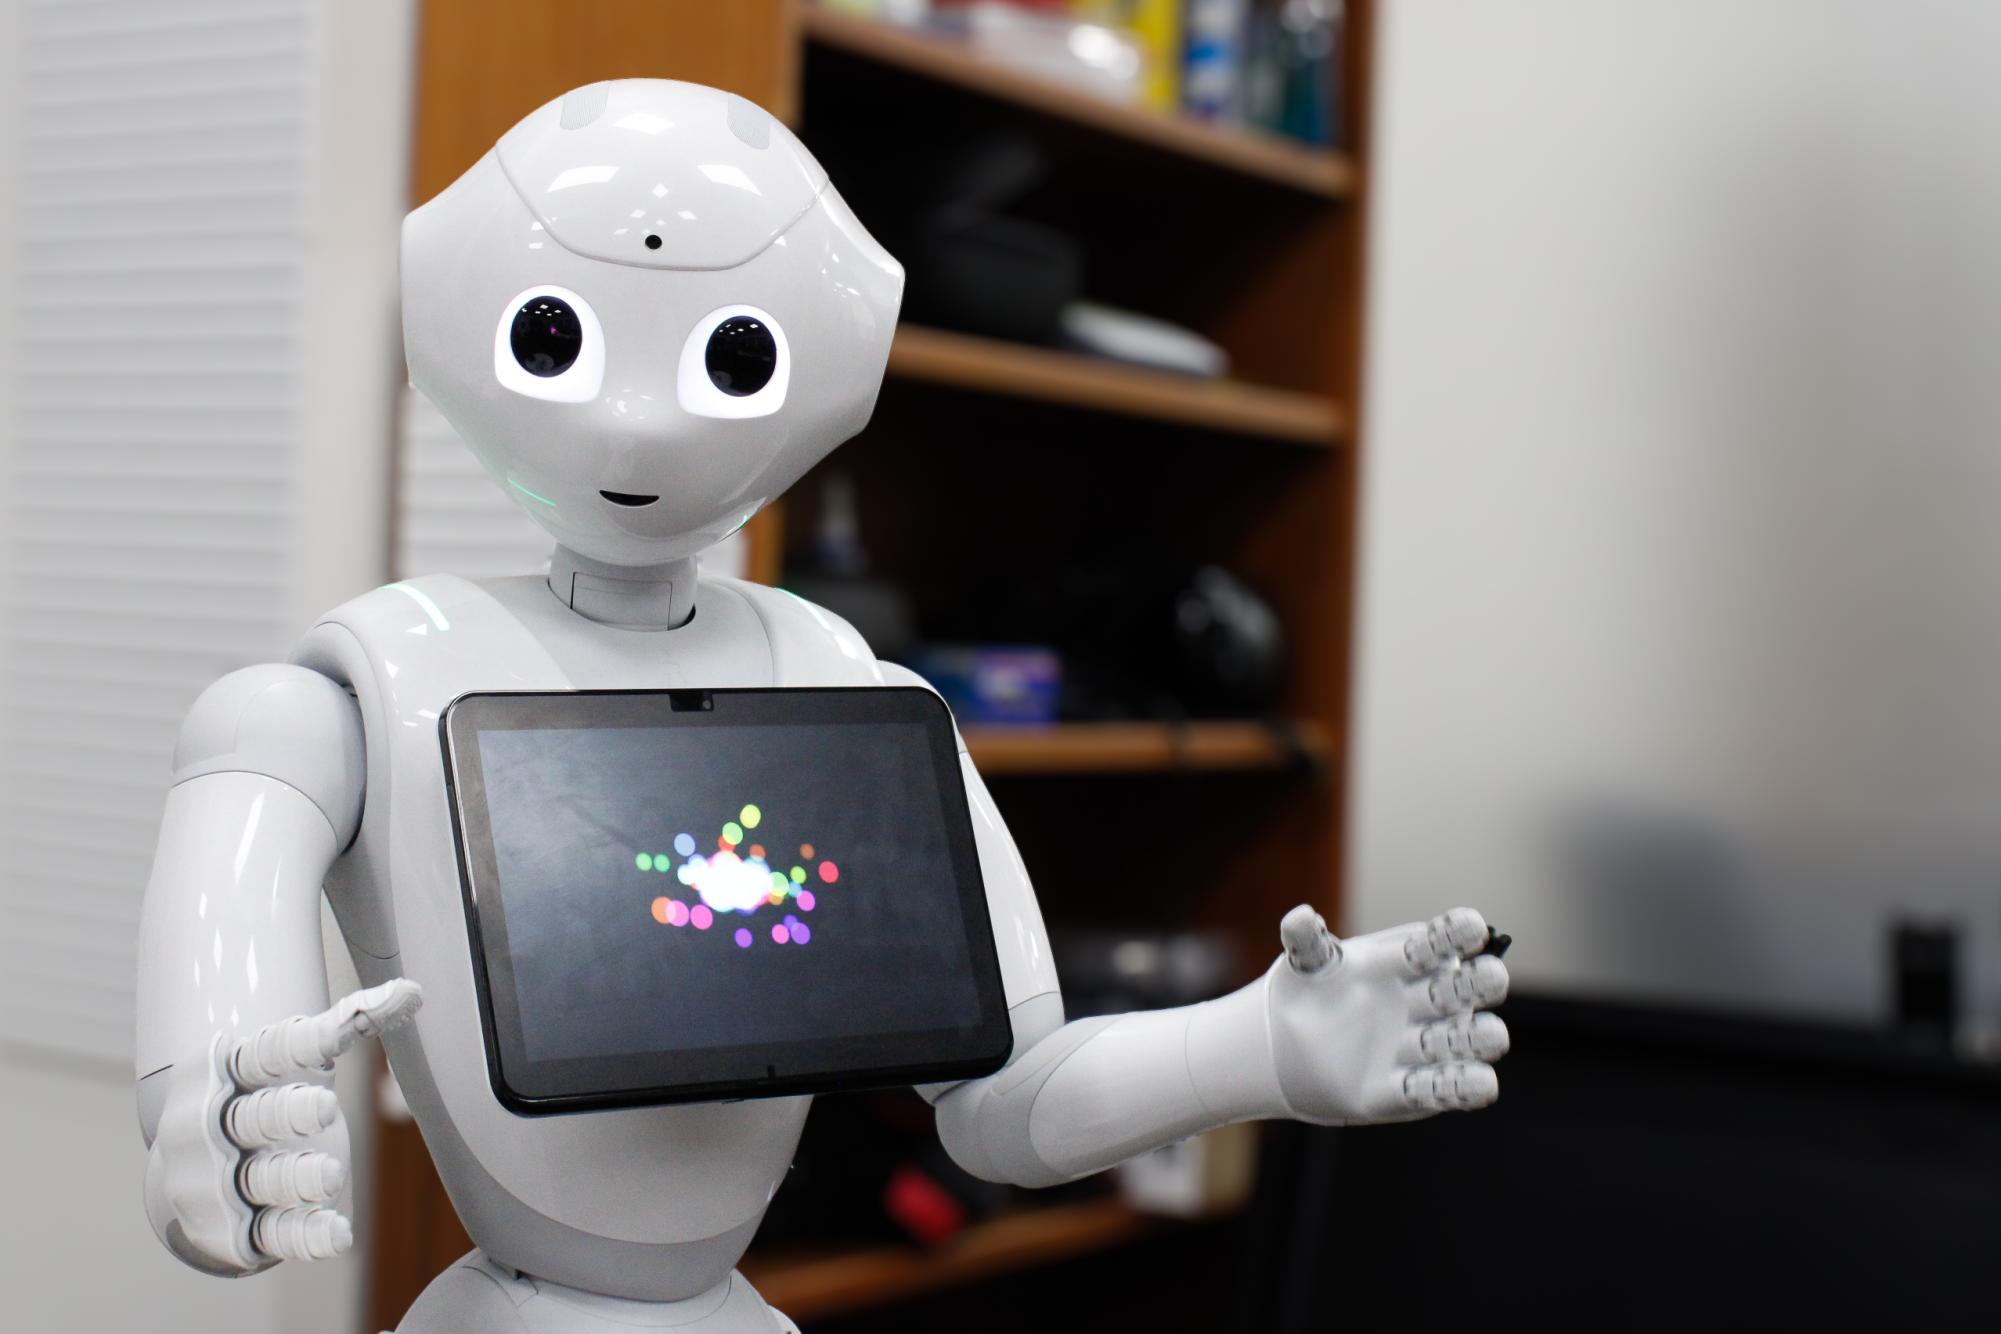 Pepper demonstrates its interface capabilities at the James Silberrad Brown Center for Artificial Intelligence at San Diego State University on April 17, 2024.